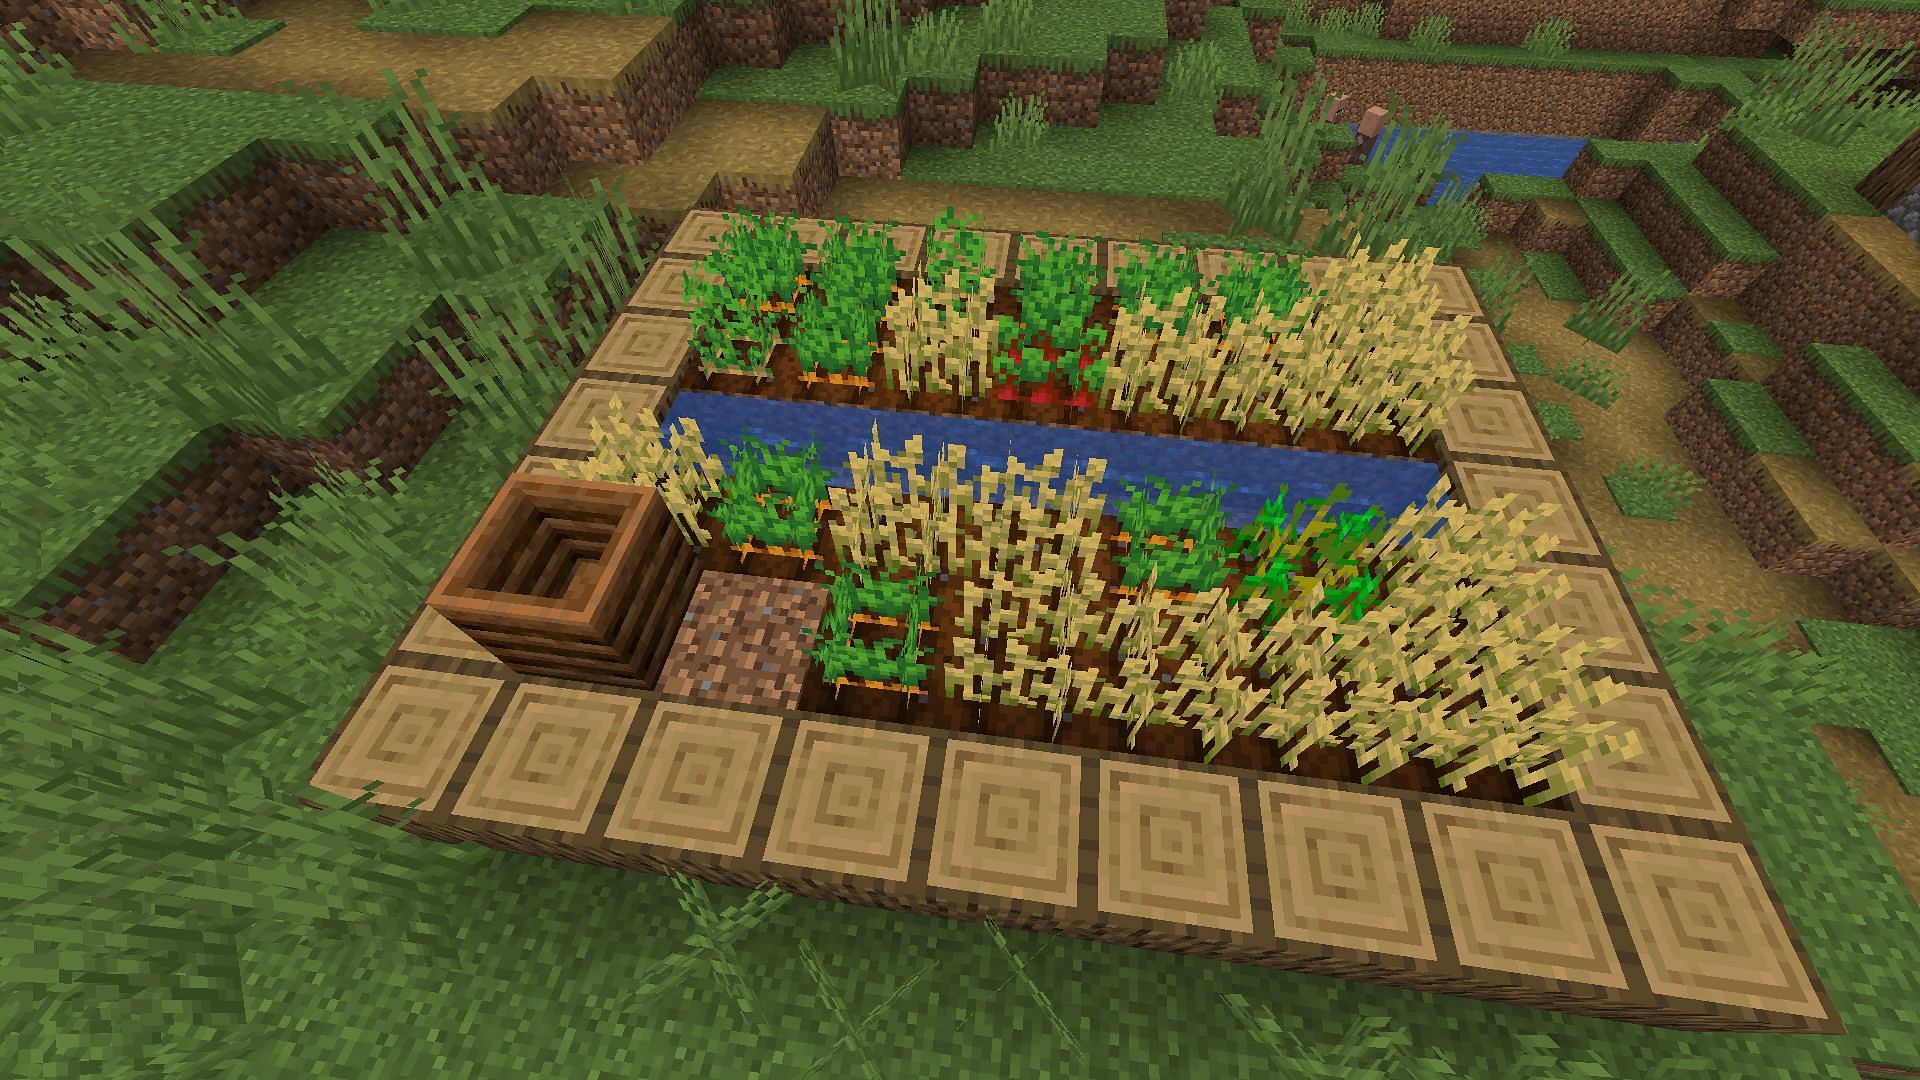 A composter found in a village as part of a farm (Image via Minecraft)